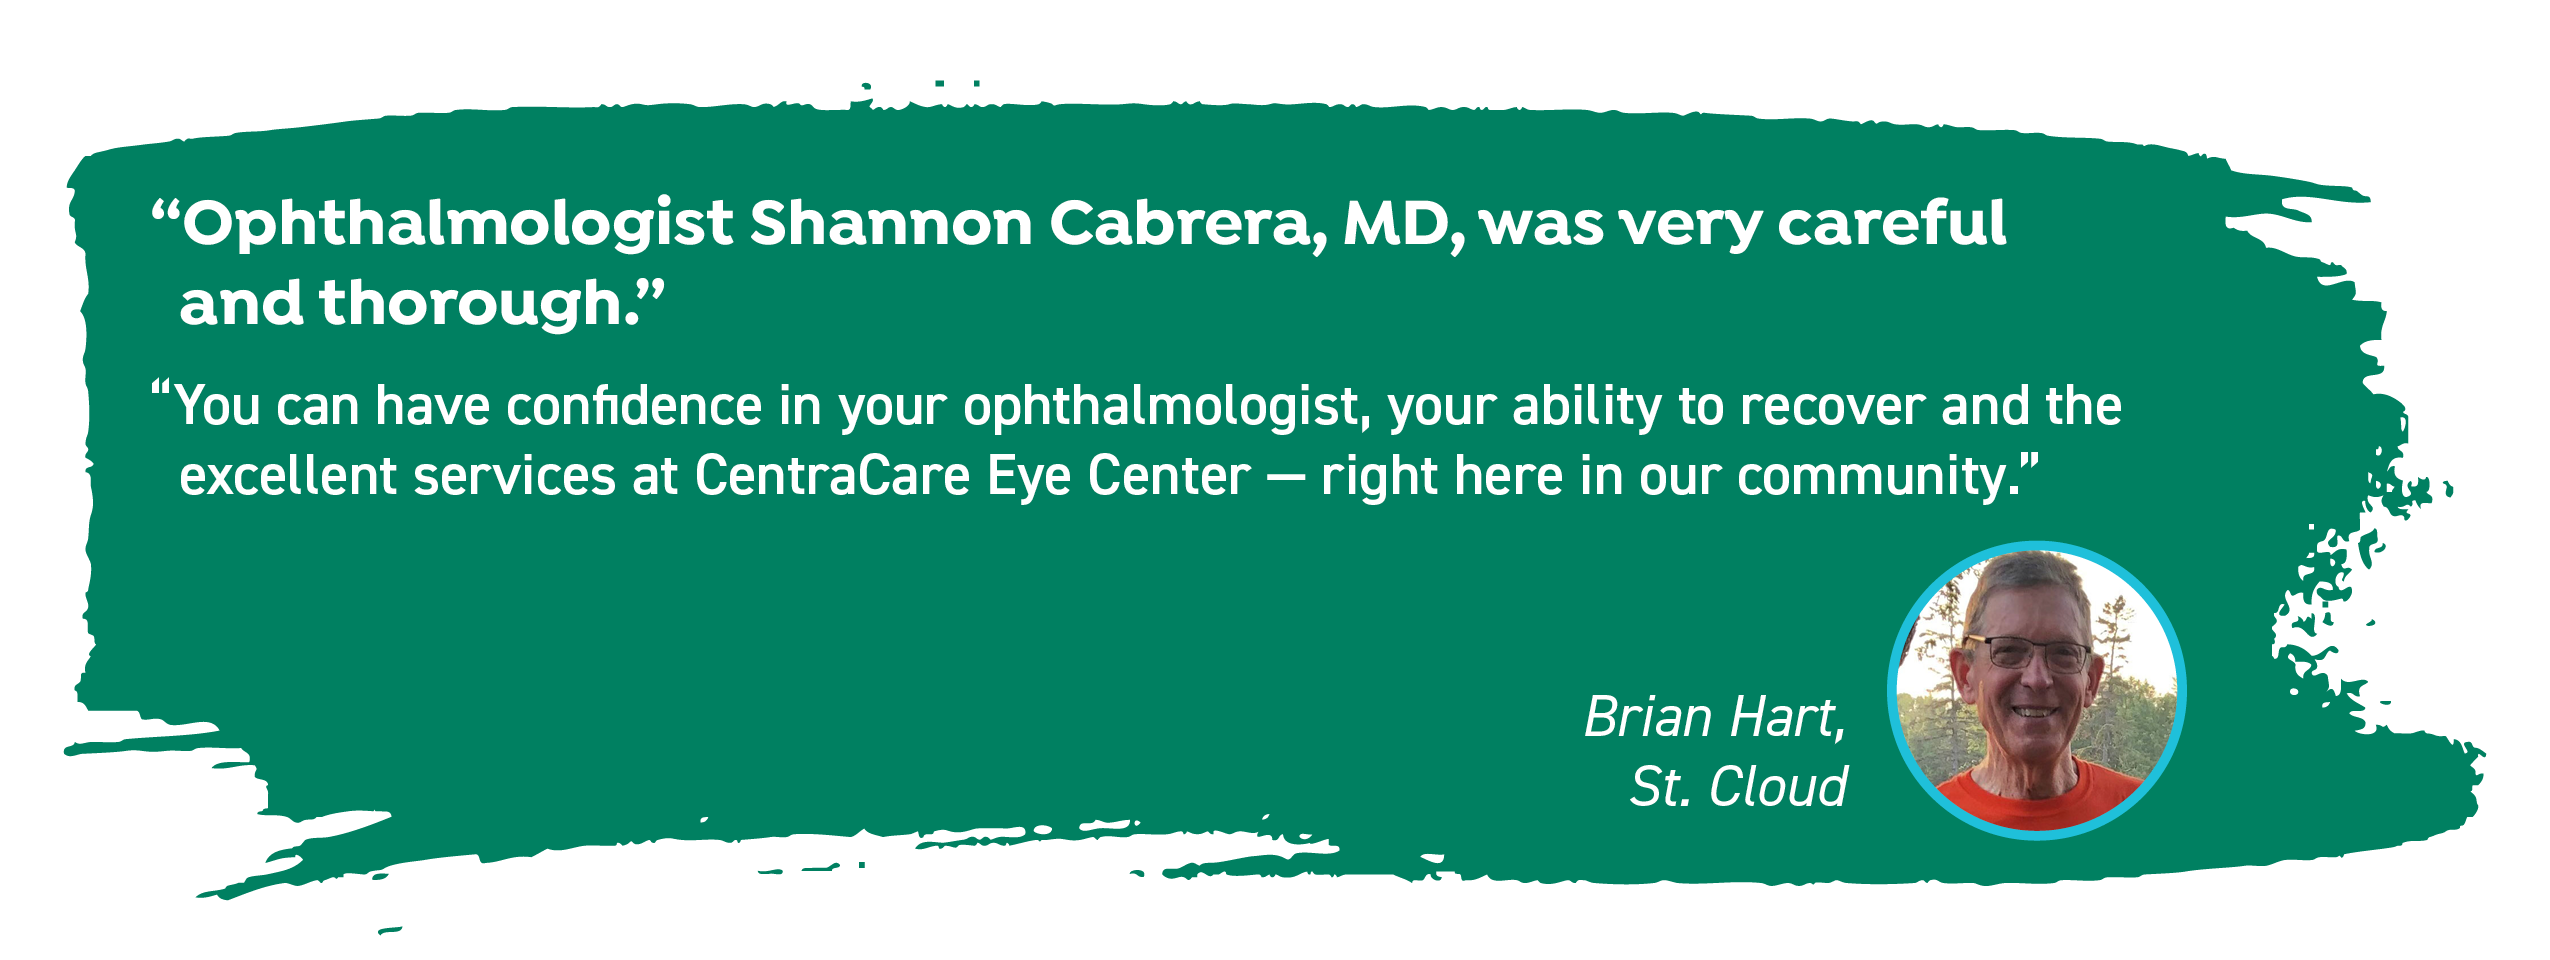 Brian Hart of St. Cloud says. "Ophthalmologist Shannon Cabrera, MD, was very careful and thorough. You can have confidence in your ophthalmologist, your ability to recover and the excellent services at CentraCare Eye Center - right here in our community."